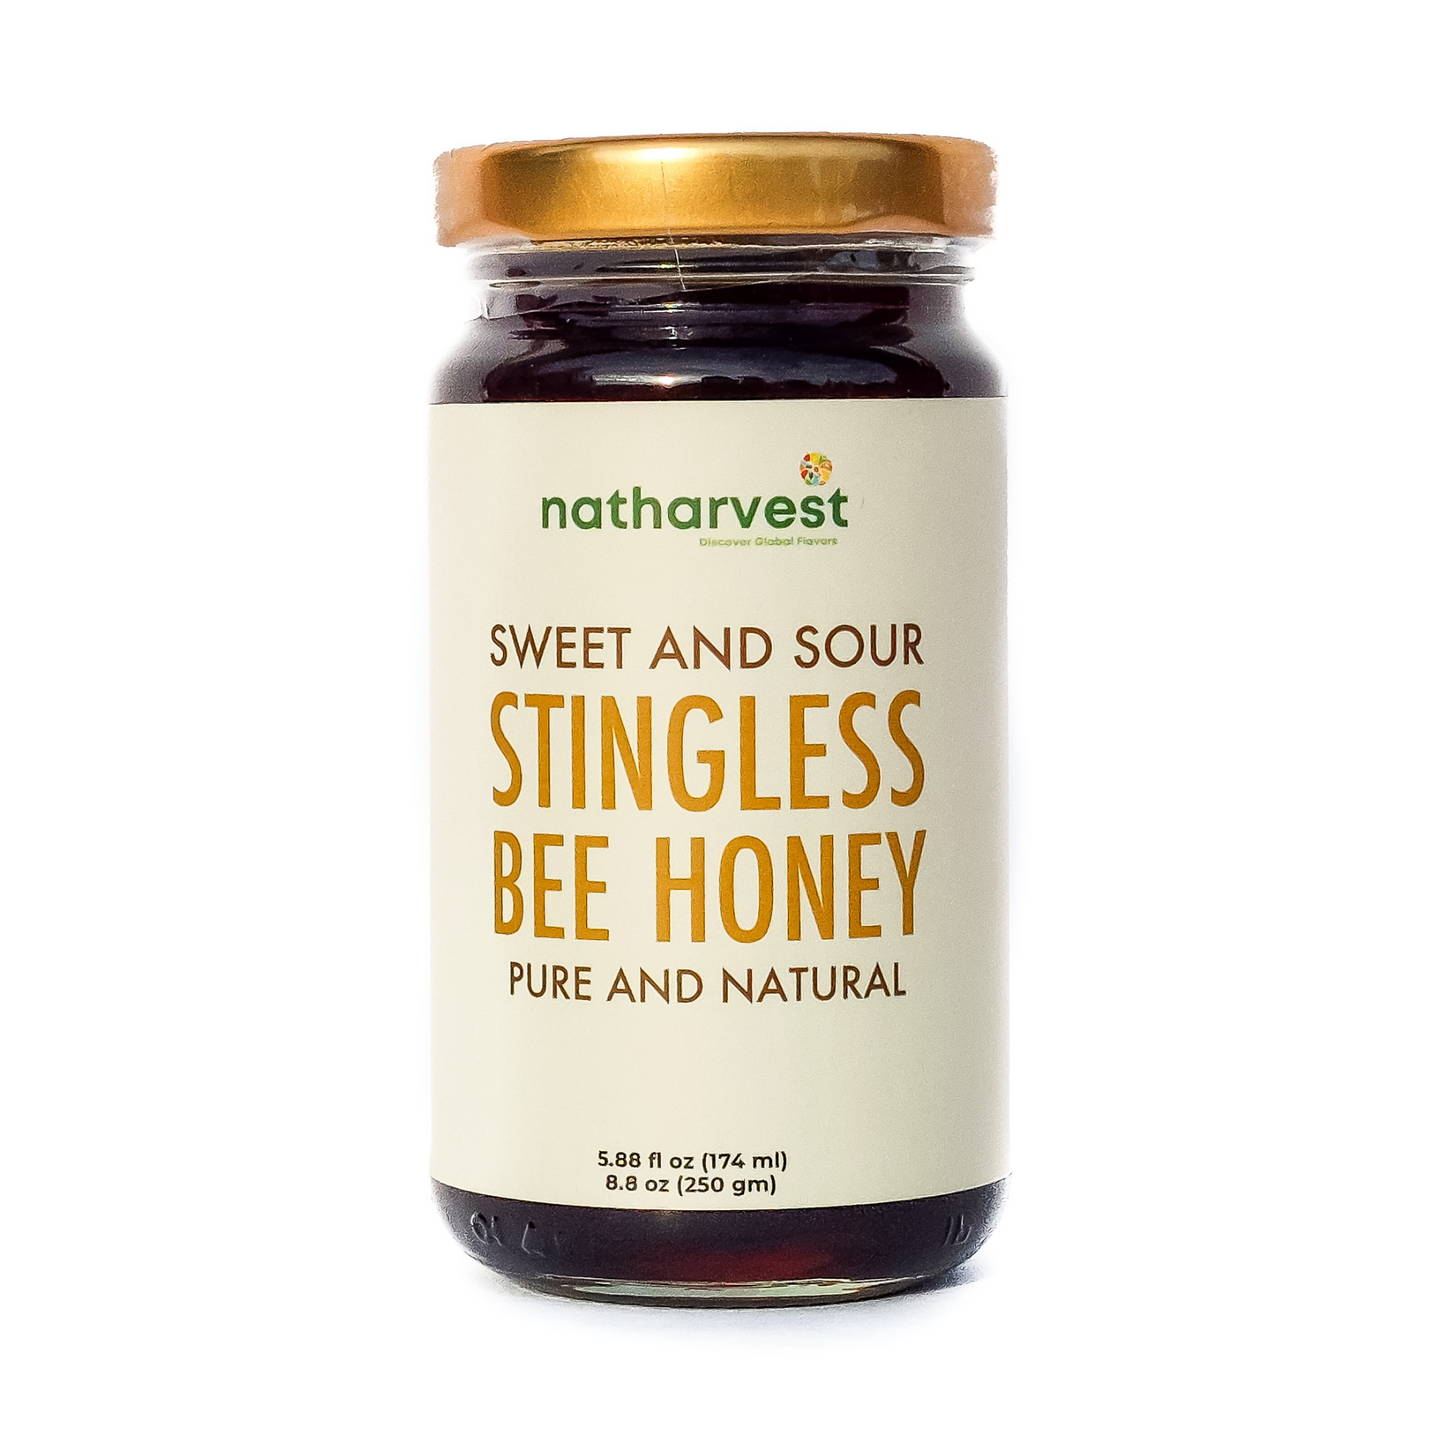 Natharvest Sweet and Sour Stingless Bee Honey, 8.8 oz (250 grams), a case of 30